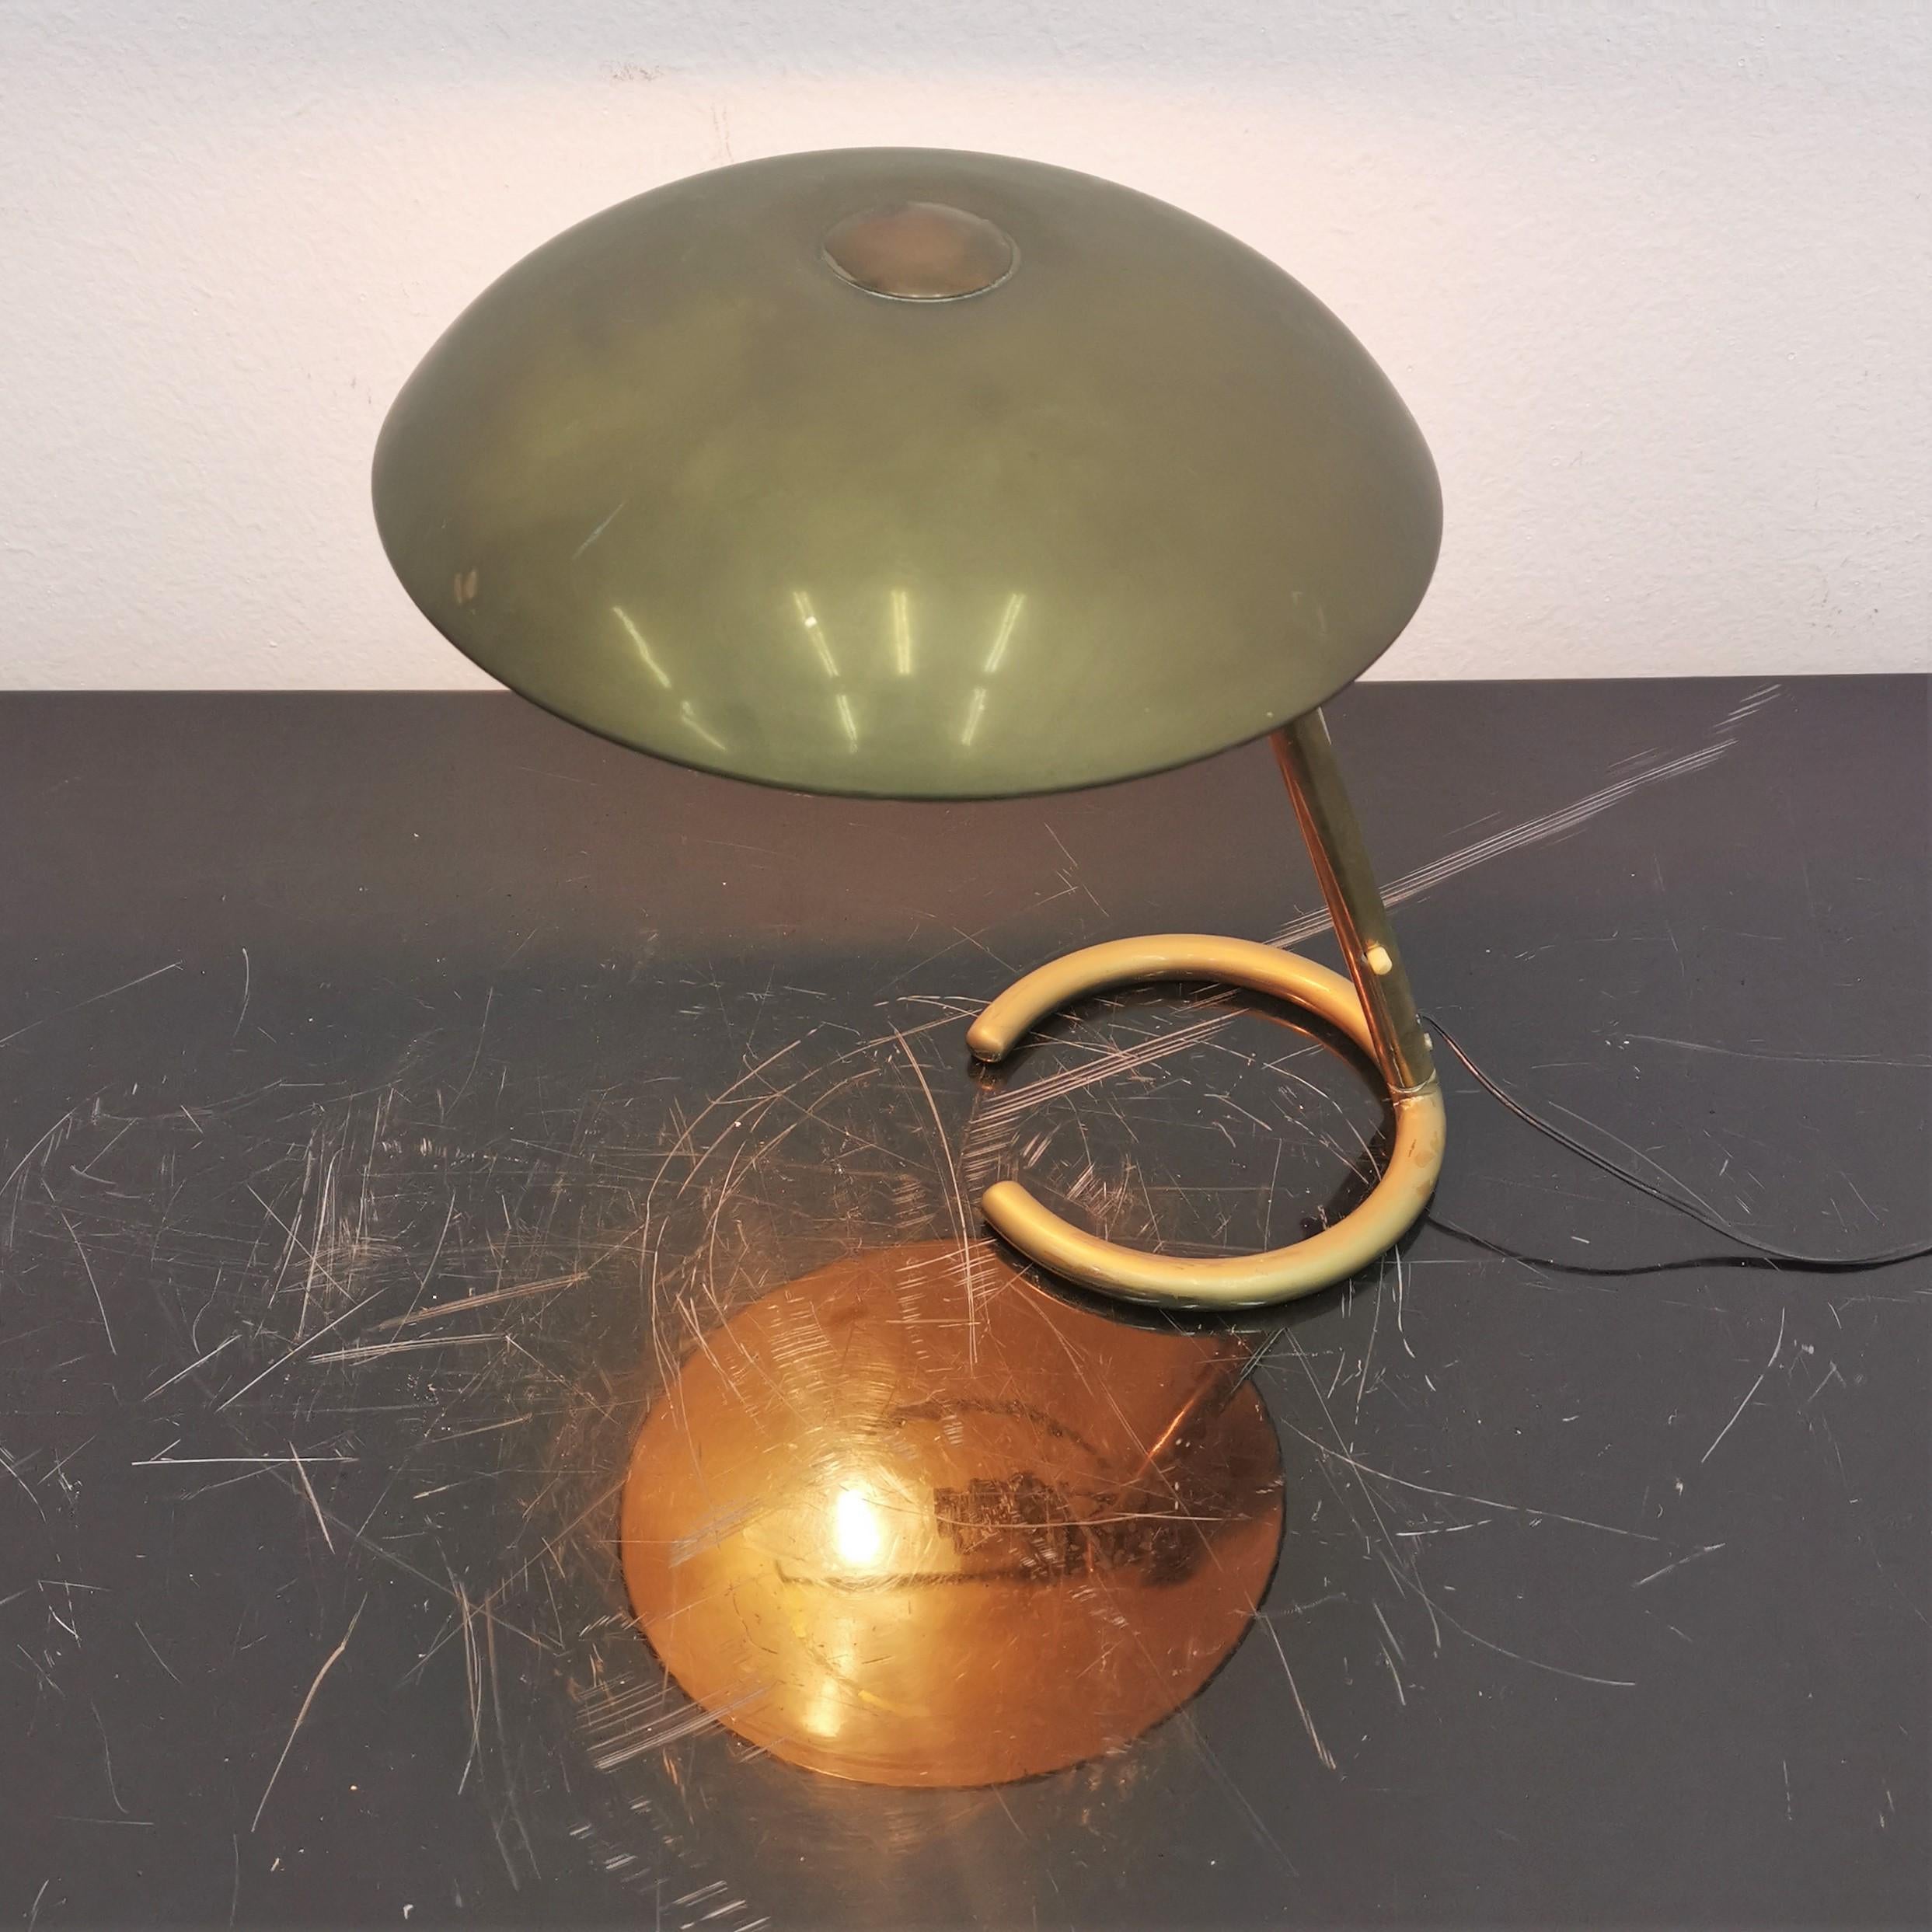 Original table lamp in gilded brass, adjustable, with circular lampshade and ring base in thick brass rod.
Attributed to Stilnovo, 50s, Italy.
Wear consistent with age and use.